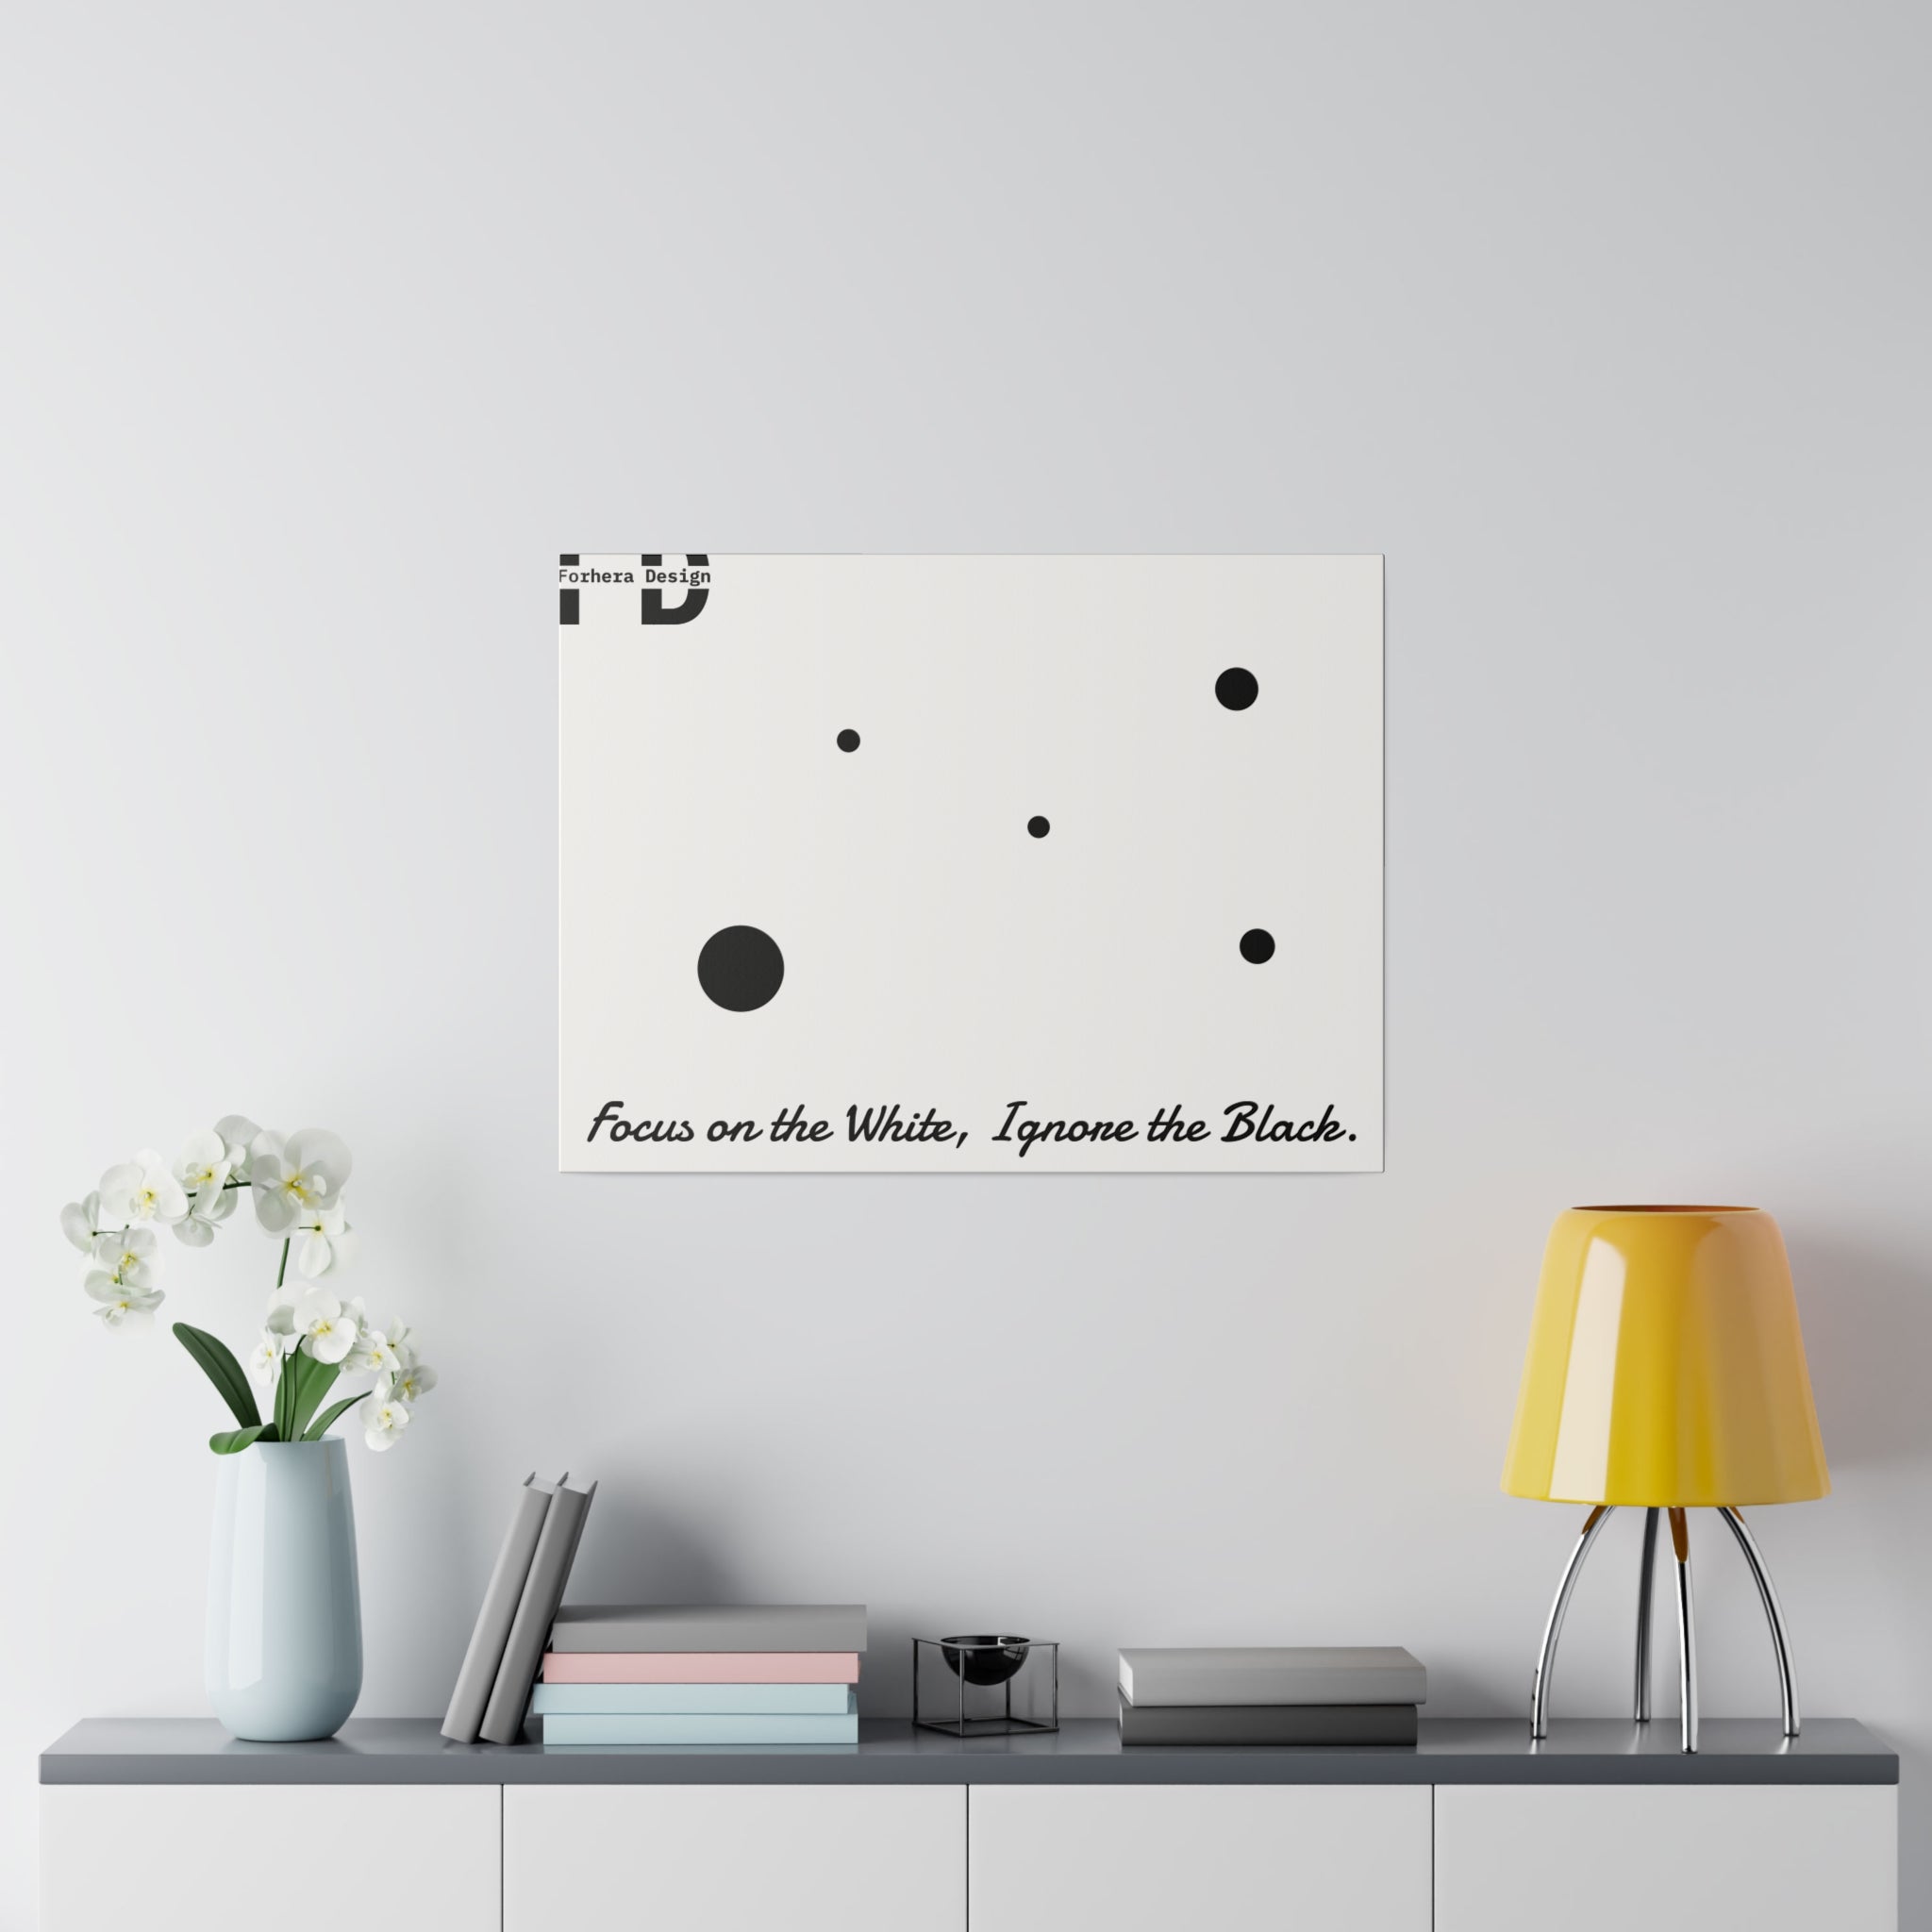 Focus on the White, Ignore the Black. Forhera Design Matte Canvas, Stretched, 0.75